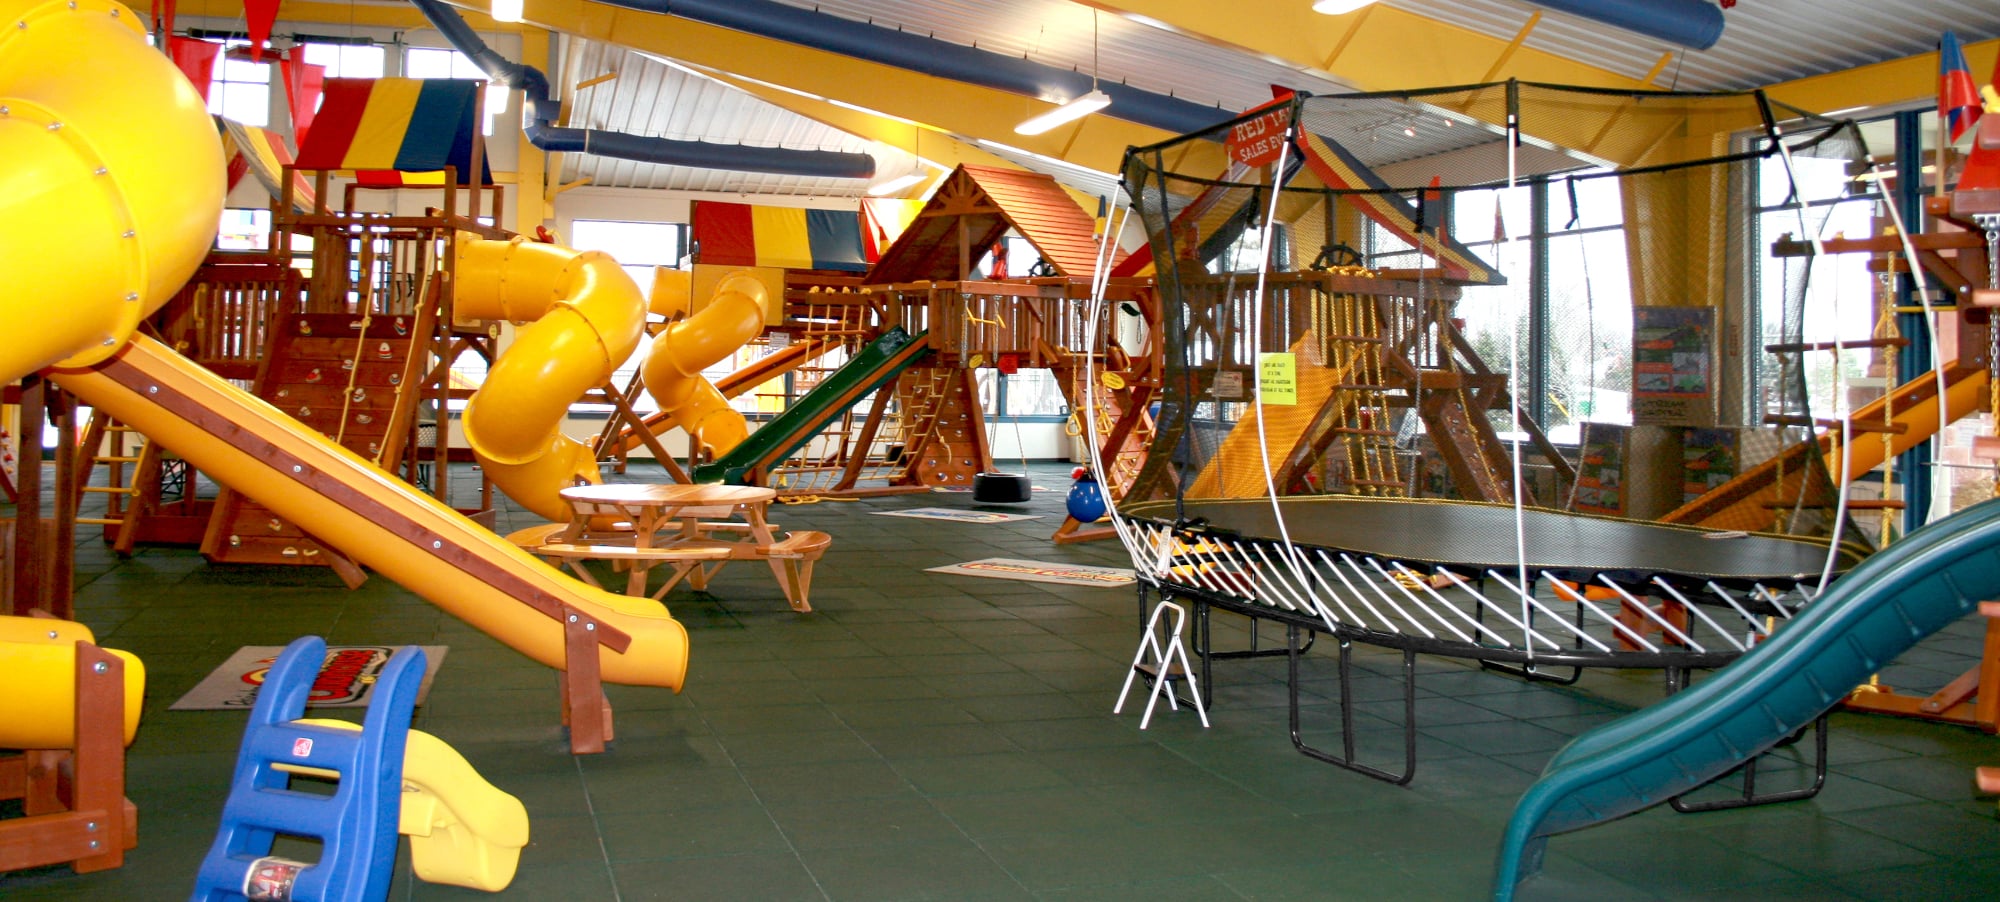 Kids Party Rooms Near Me Kosher Restaurant With Private Party Rooms 